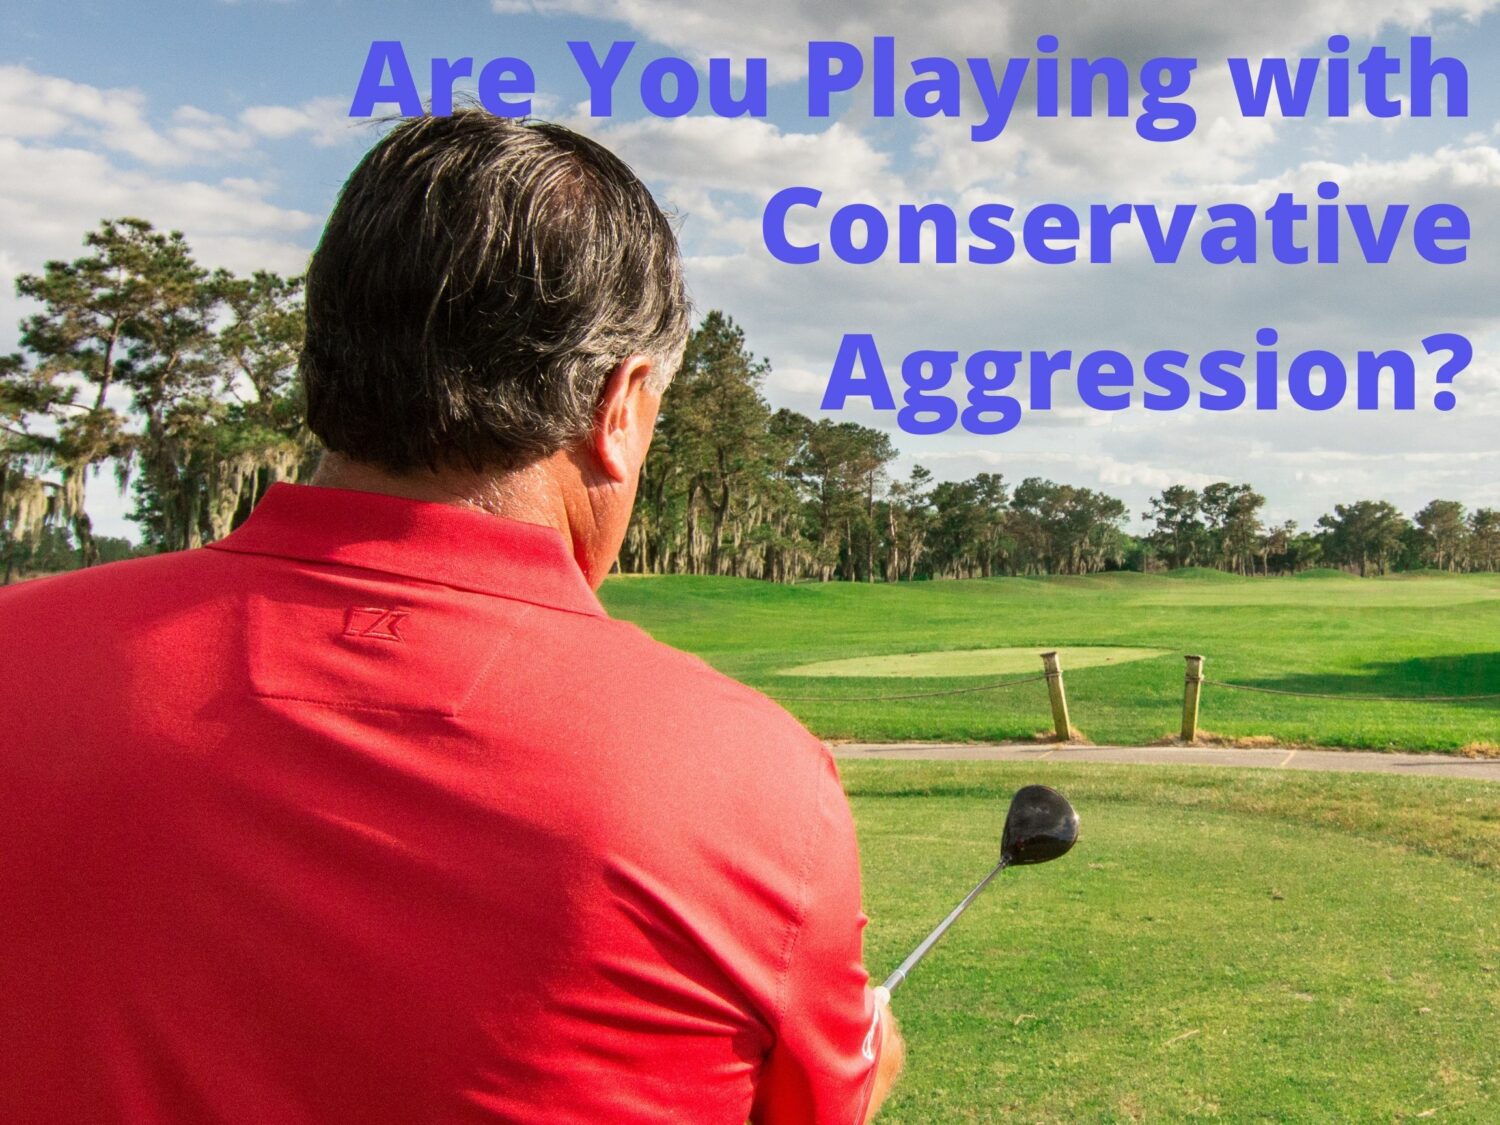 Are You playing with conservative aggression, John Hughes Golf, Florida Golf Schools, Golf Schools in Florida, Orlando Golf Schools, Golf Schools in Orlando